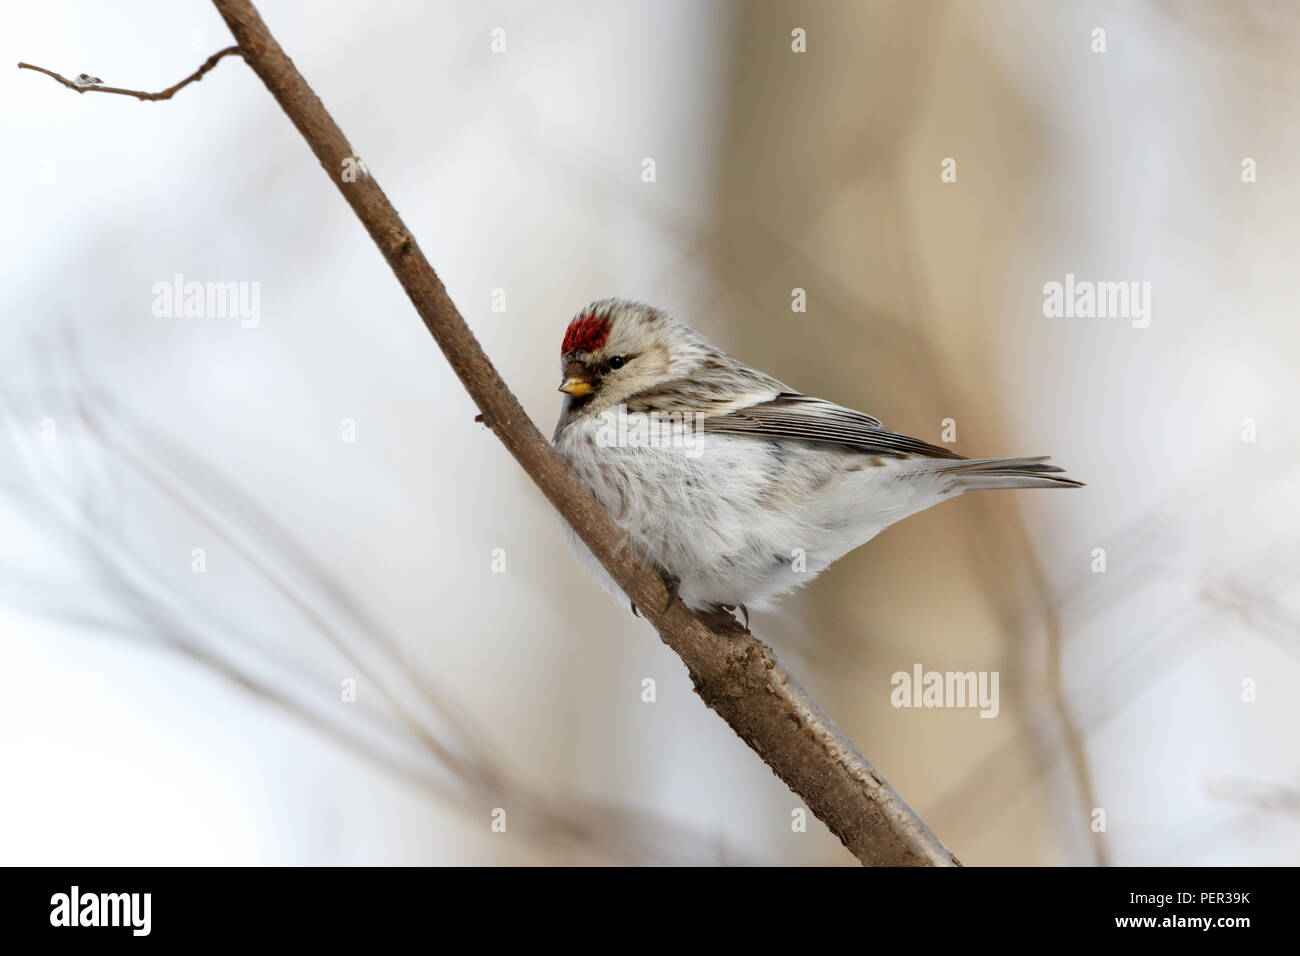 Arctic Redpoll (Acanthis hornemanni). Moscow region, Russia. Park Kurkino. Bird's species is identified inaccurately. Stock Photo